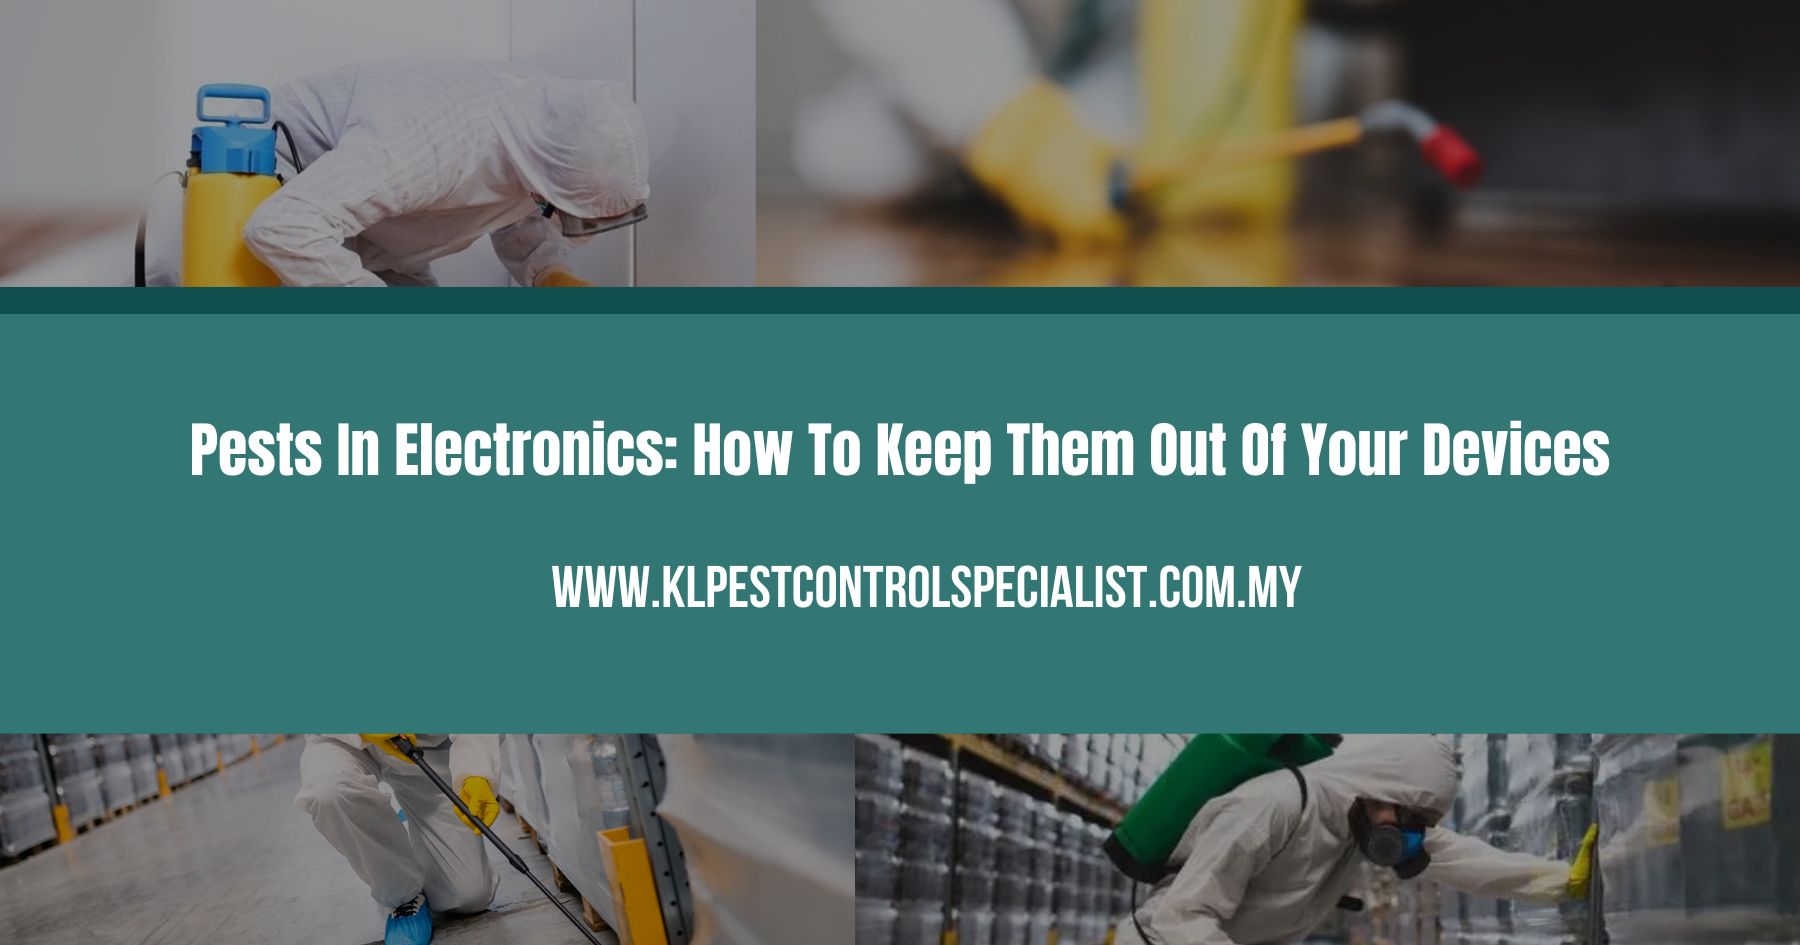 Pests In Electronics: How To Keep Them Out Of Your Devices